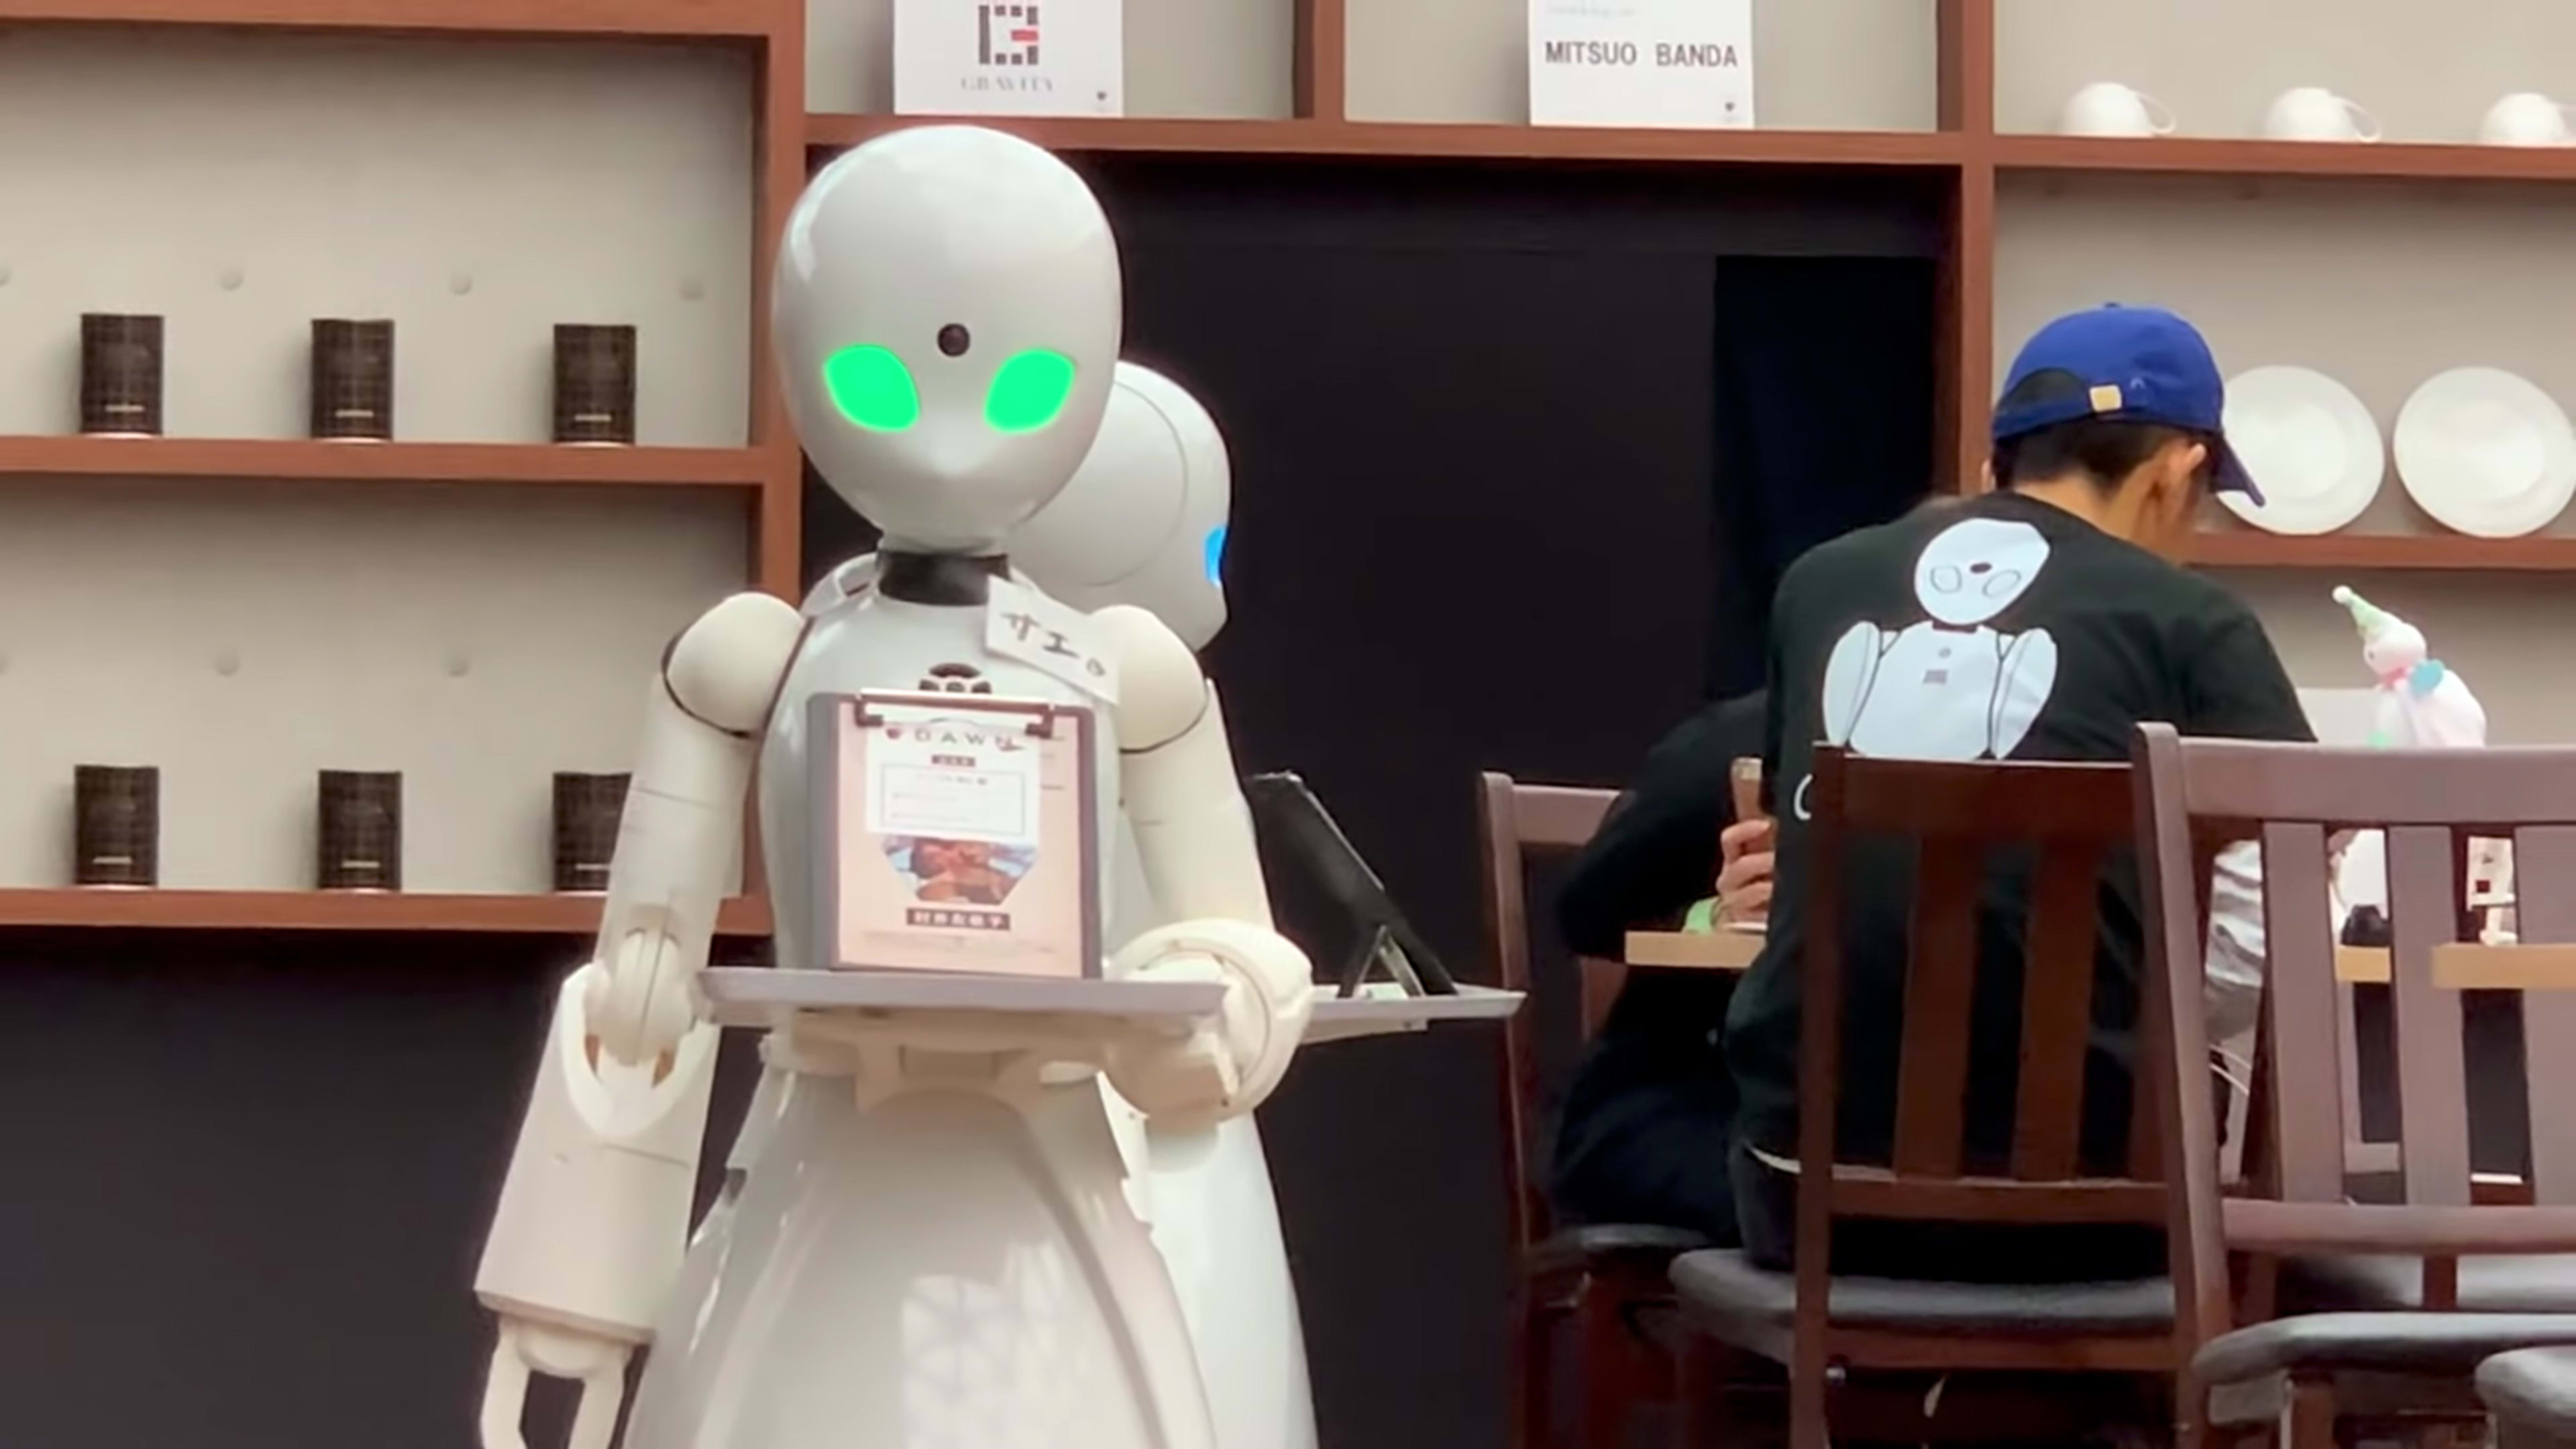 This Tokyo cafe is staffed by robots remotely controlled by people with disabilities